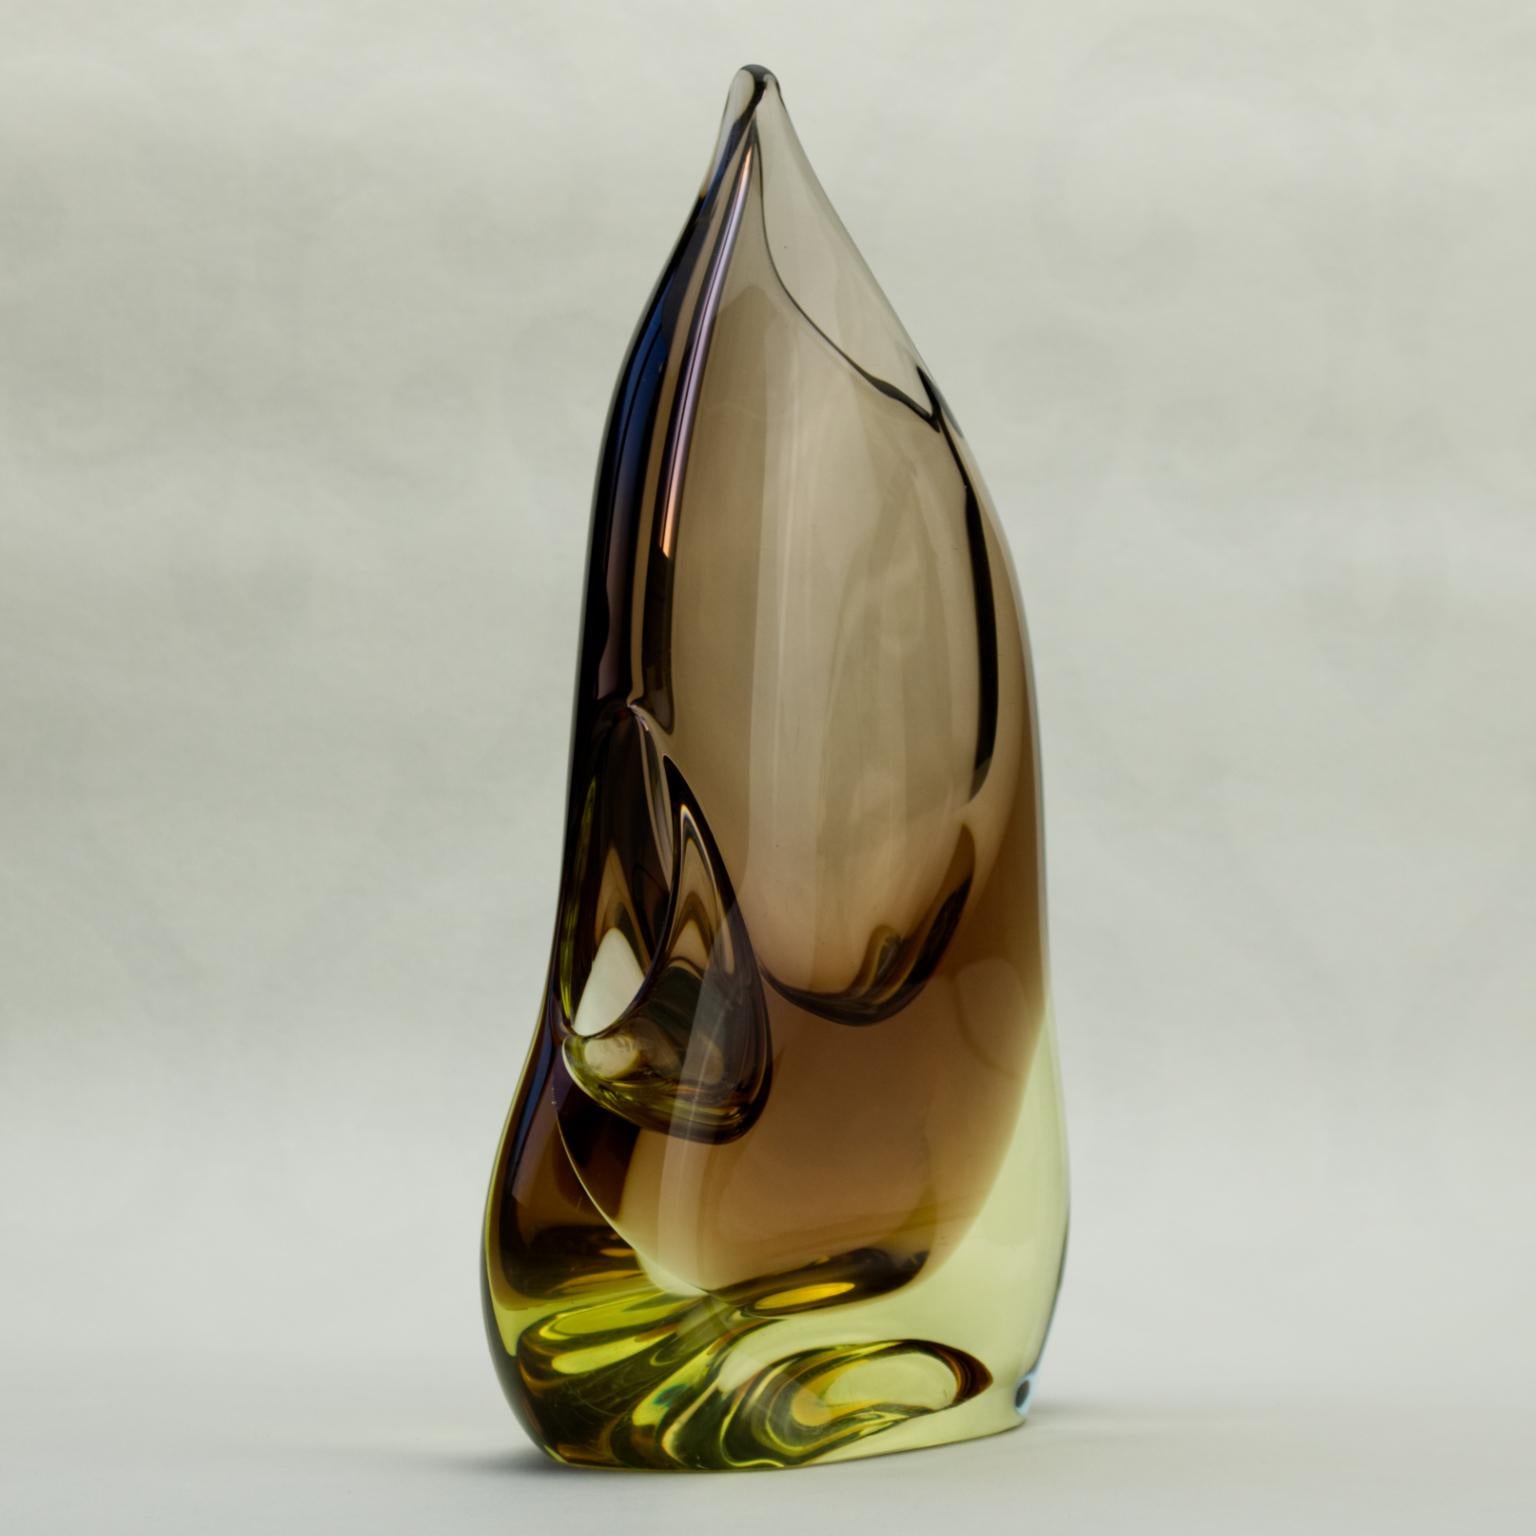 A stunning Czech organic glass vase, made in amber and yellow/citrine glass. Made by the Zelezny Brod glassworks, also known as Železnobrodské Sklo (ZBS), and designed by Miloslav Klinger in the 1960s. A vase from this range is shown in the book 